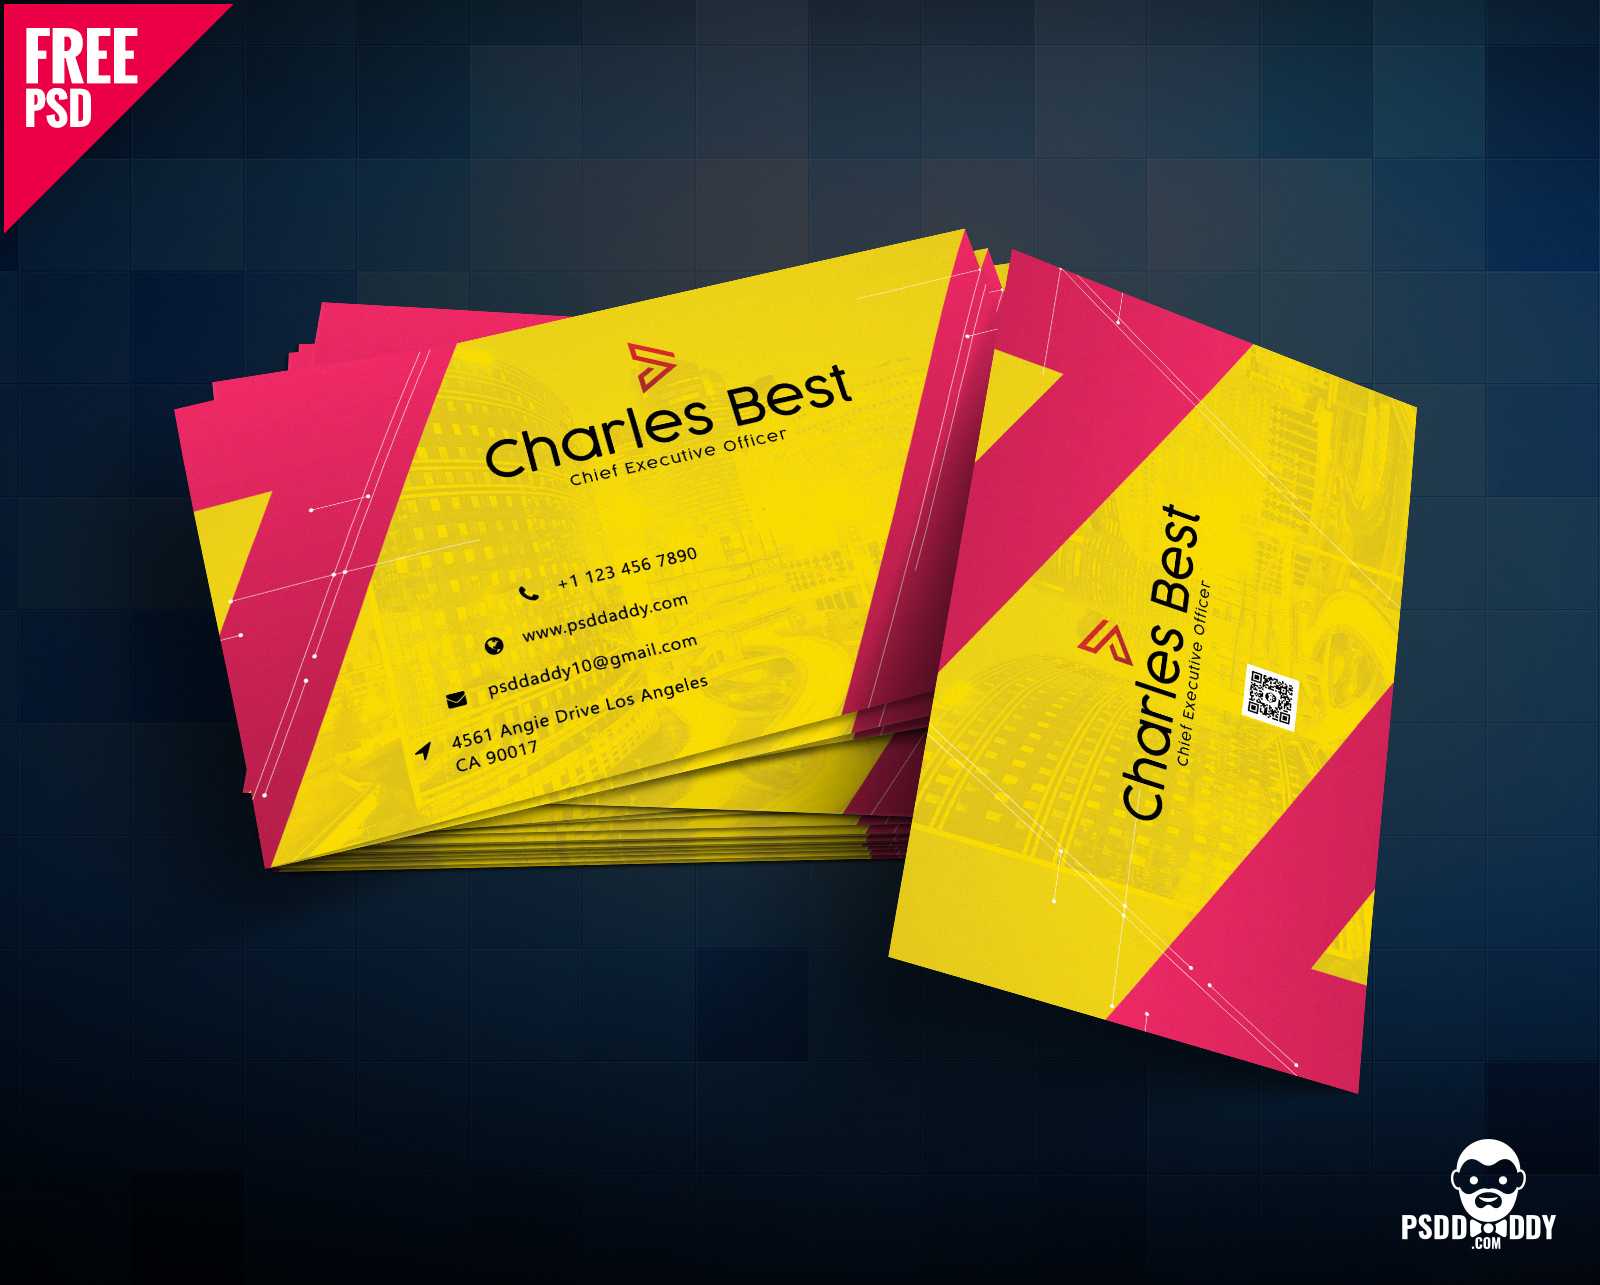 Download] Creative Business Card Free Psd | Psddaddy With Regard To Visiting Card Templates Psd Free Download